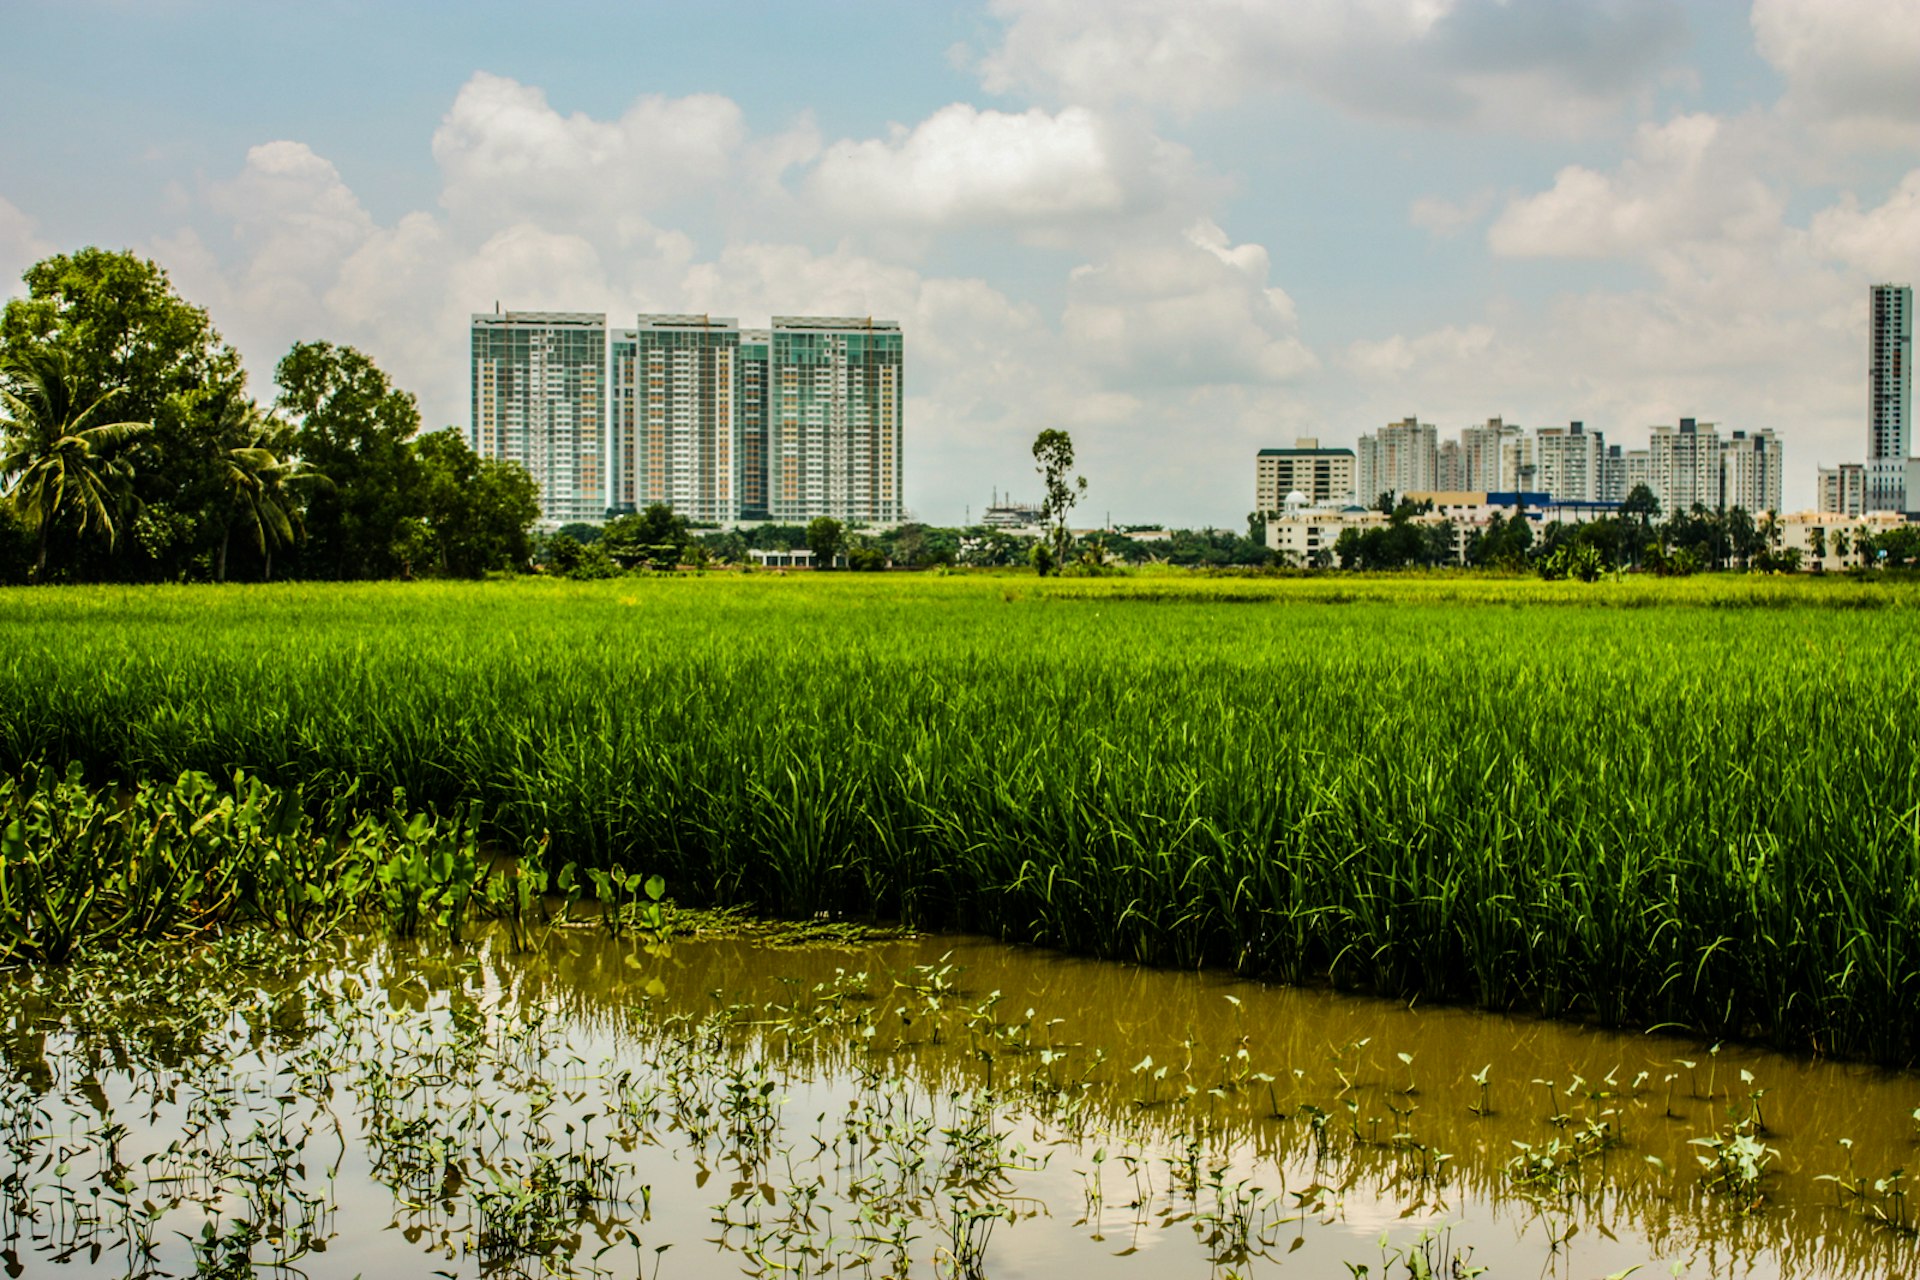 Green rice fields, with buildings in the background on the island of Thanh Da, Ho Chi Minh City